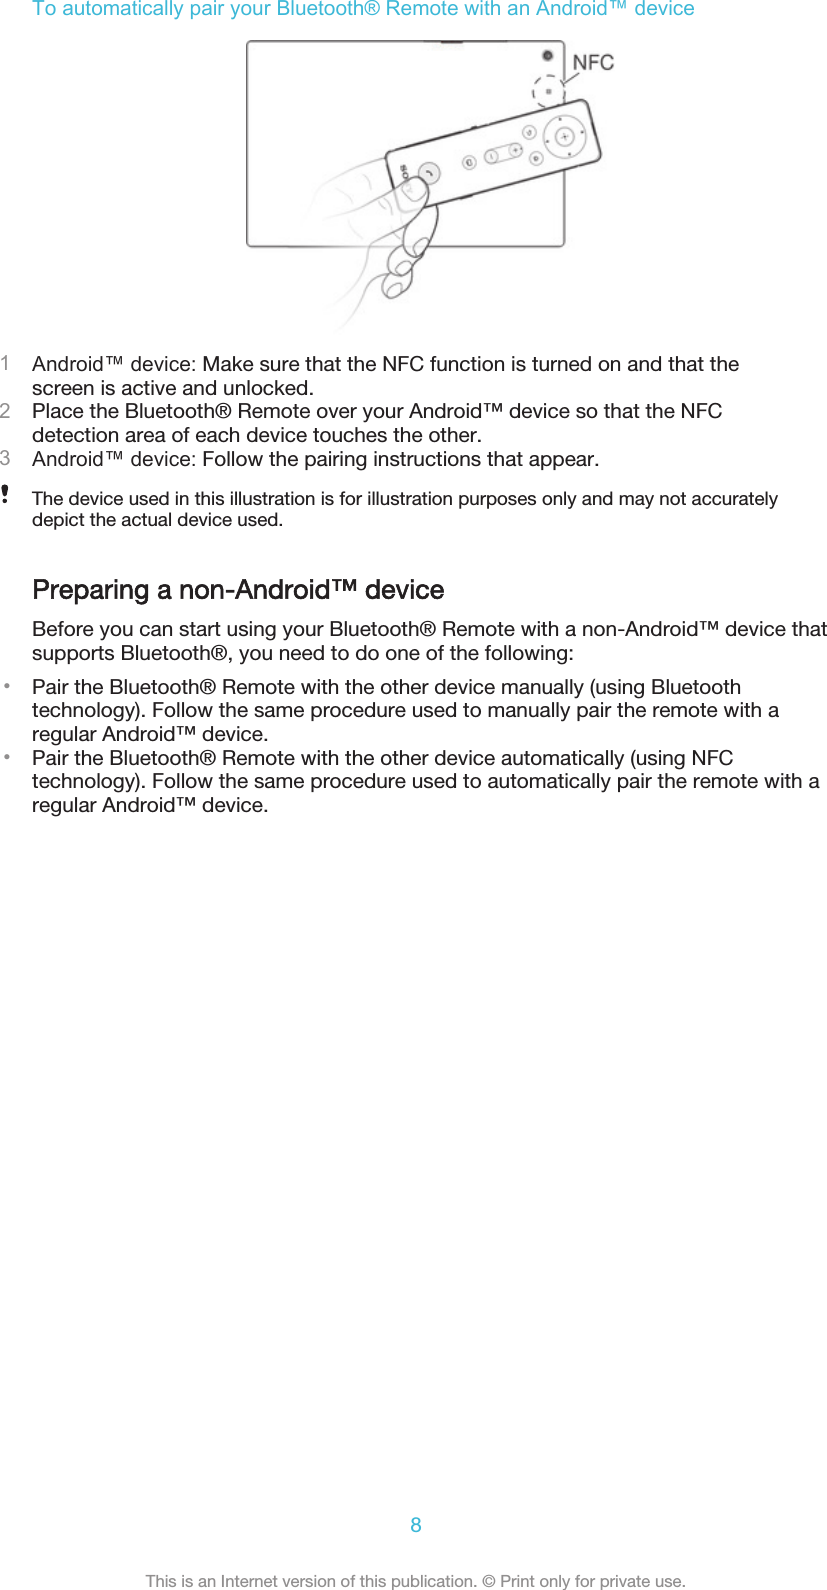 To automatically pair your Bluetooth® Remote with an Android™ device1Android™ device: Make sure that the NFC function is turned on and that thescreen is active and unlocked.2Place the Bluetooth® Remote over your Android™ device so that the NFCdetection area of each device touches the other.3Android™ device: Follow the pairing instructions that appear.The device used in this illustration is for illustration purposes only and may not accuratelydepict the actual device used.Preparing a non-Android™ deviceBefore you can start using your Bluetooth® Remote with a non-Android™ device thatsupports Bluetooth®, you need to do one of the following:•Pair the Bluetooth® Remote with the other device manually (using Bluetoothtechnology). Follow the same procedure used to manually pair the remote with aregular Android™ device.•Pair the Bluetooth® Remote with the other device automatically (using NFCtechnology). Follow the same procedure used to automatically pair the remote with aregular Android™ device.8This is an Internet version of this publication. © Print only for private use.